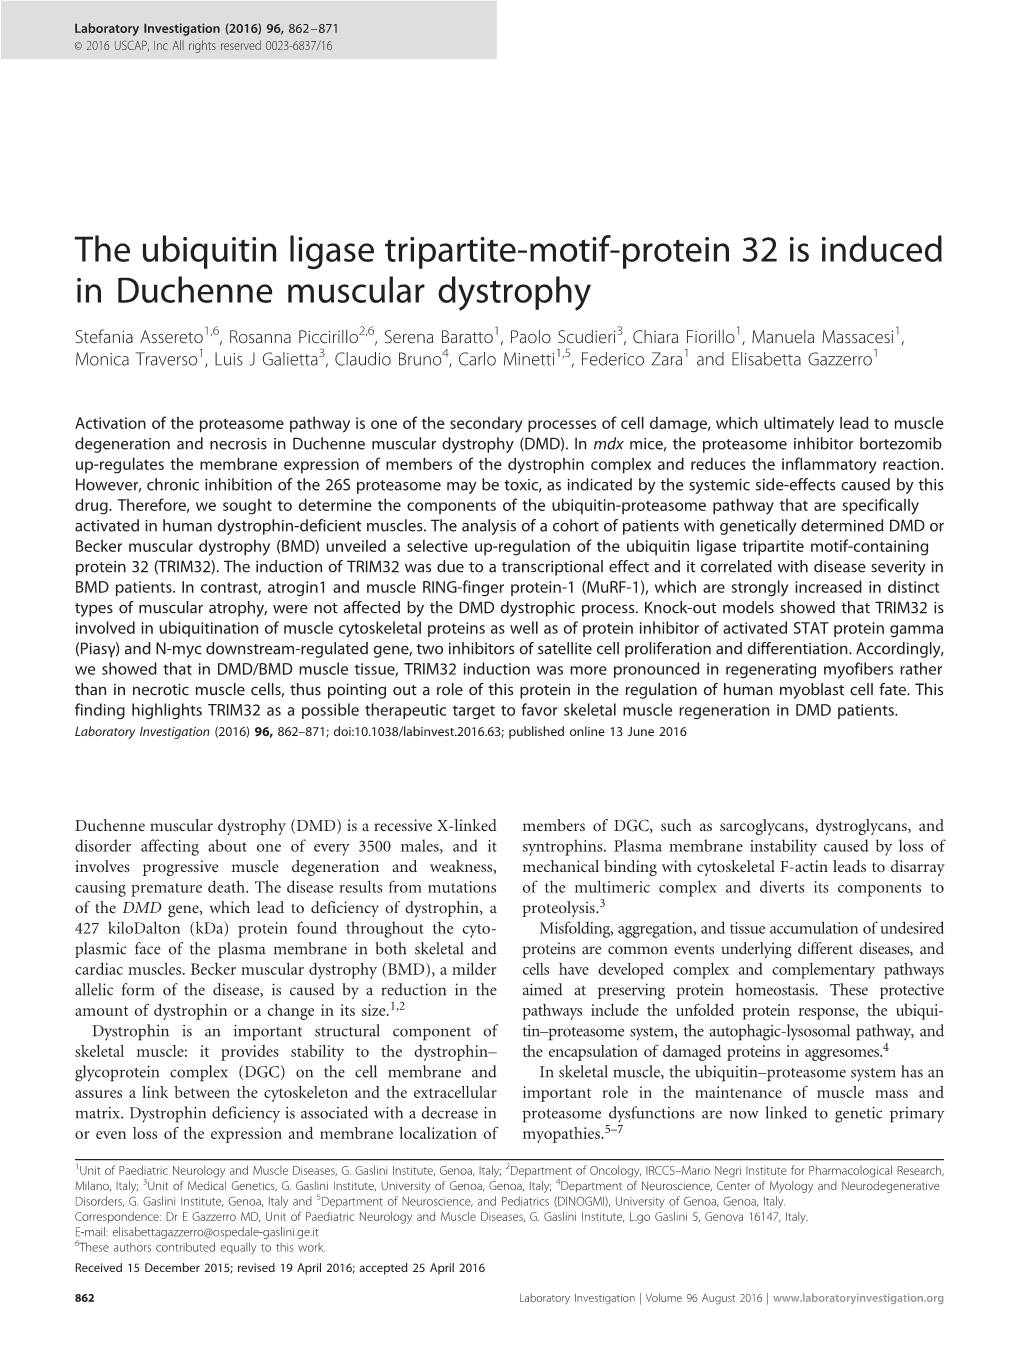 The Ubiquitin Ligase Tripartite-Motif-Protein 32 Is Induced